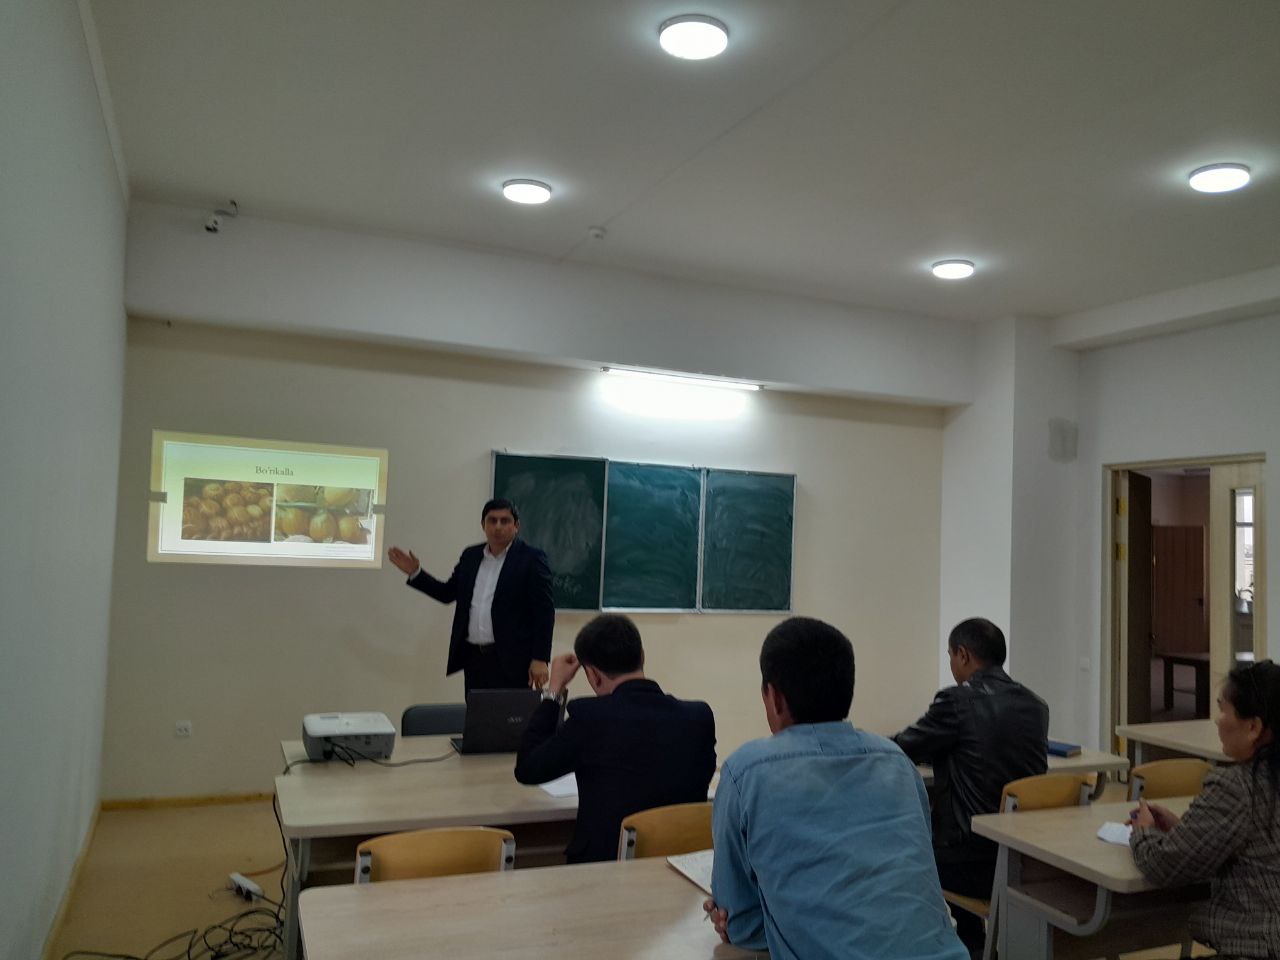 Scientific-methodological seminar on the topic of melons of Uzbekistan and their varieties by Sadullayev Sanjar, head of the Department of Fruit and Vegetables, Urganch State University